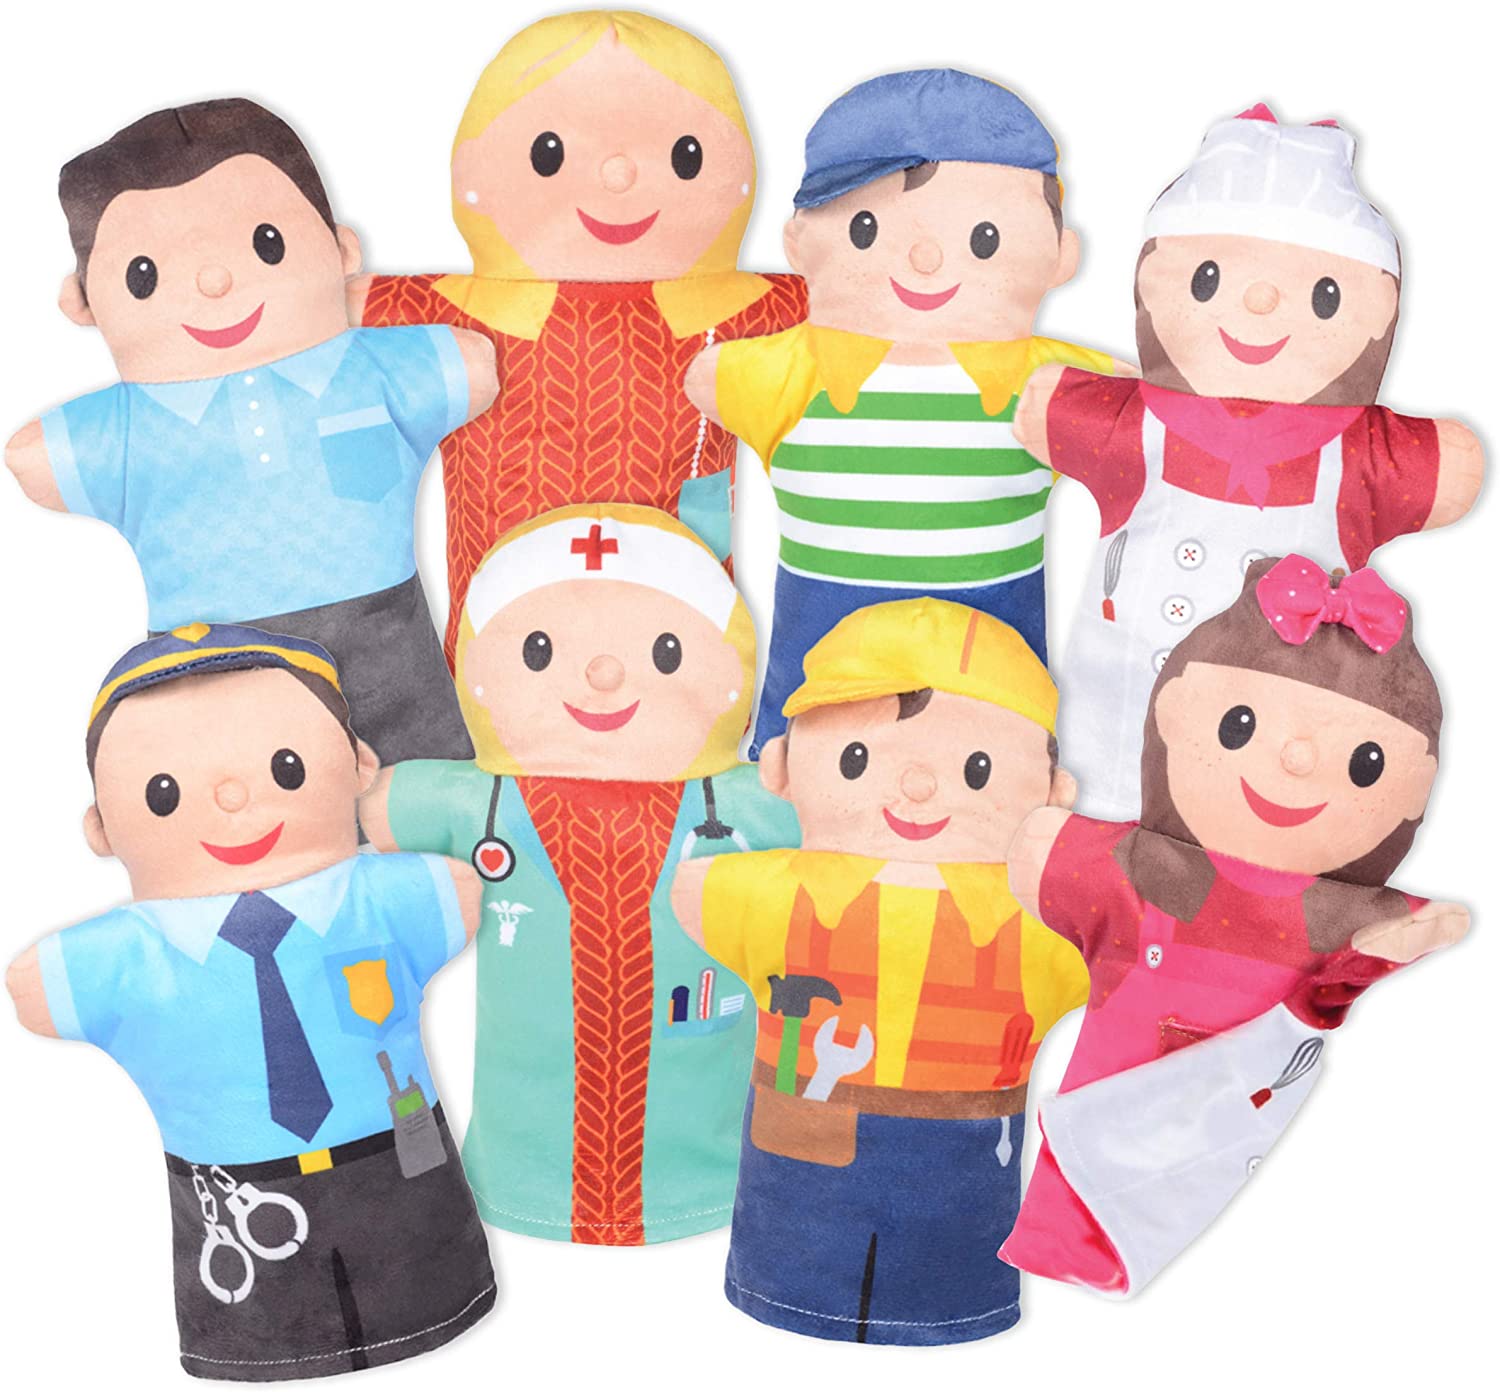 Milliard Community Workers 2-Sided Puppets, 4-Pack